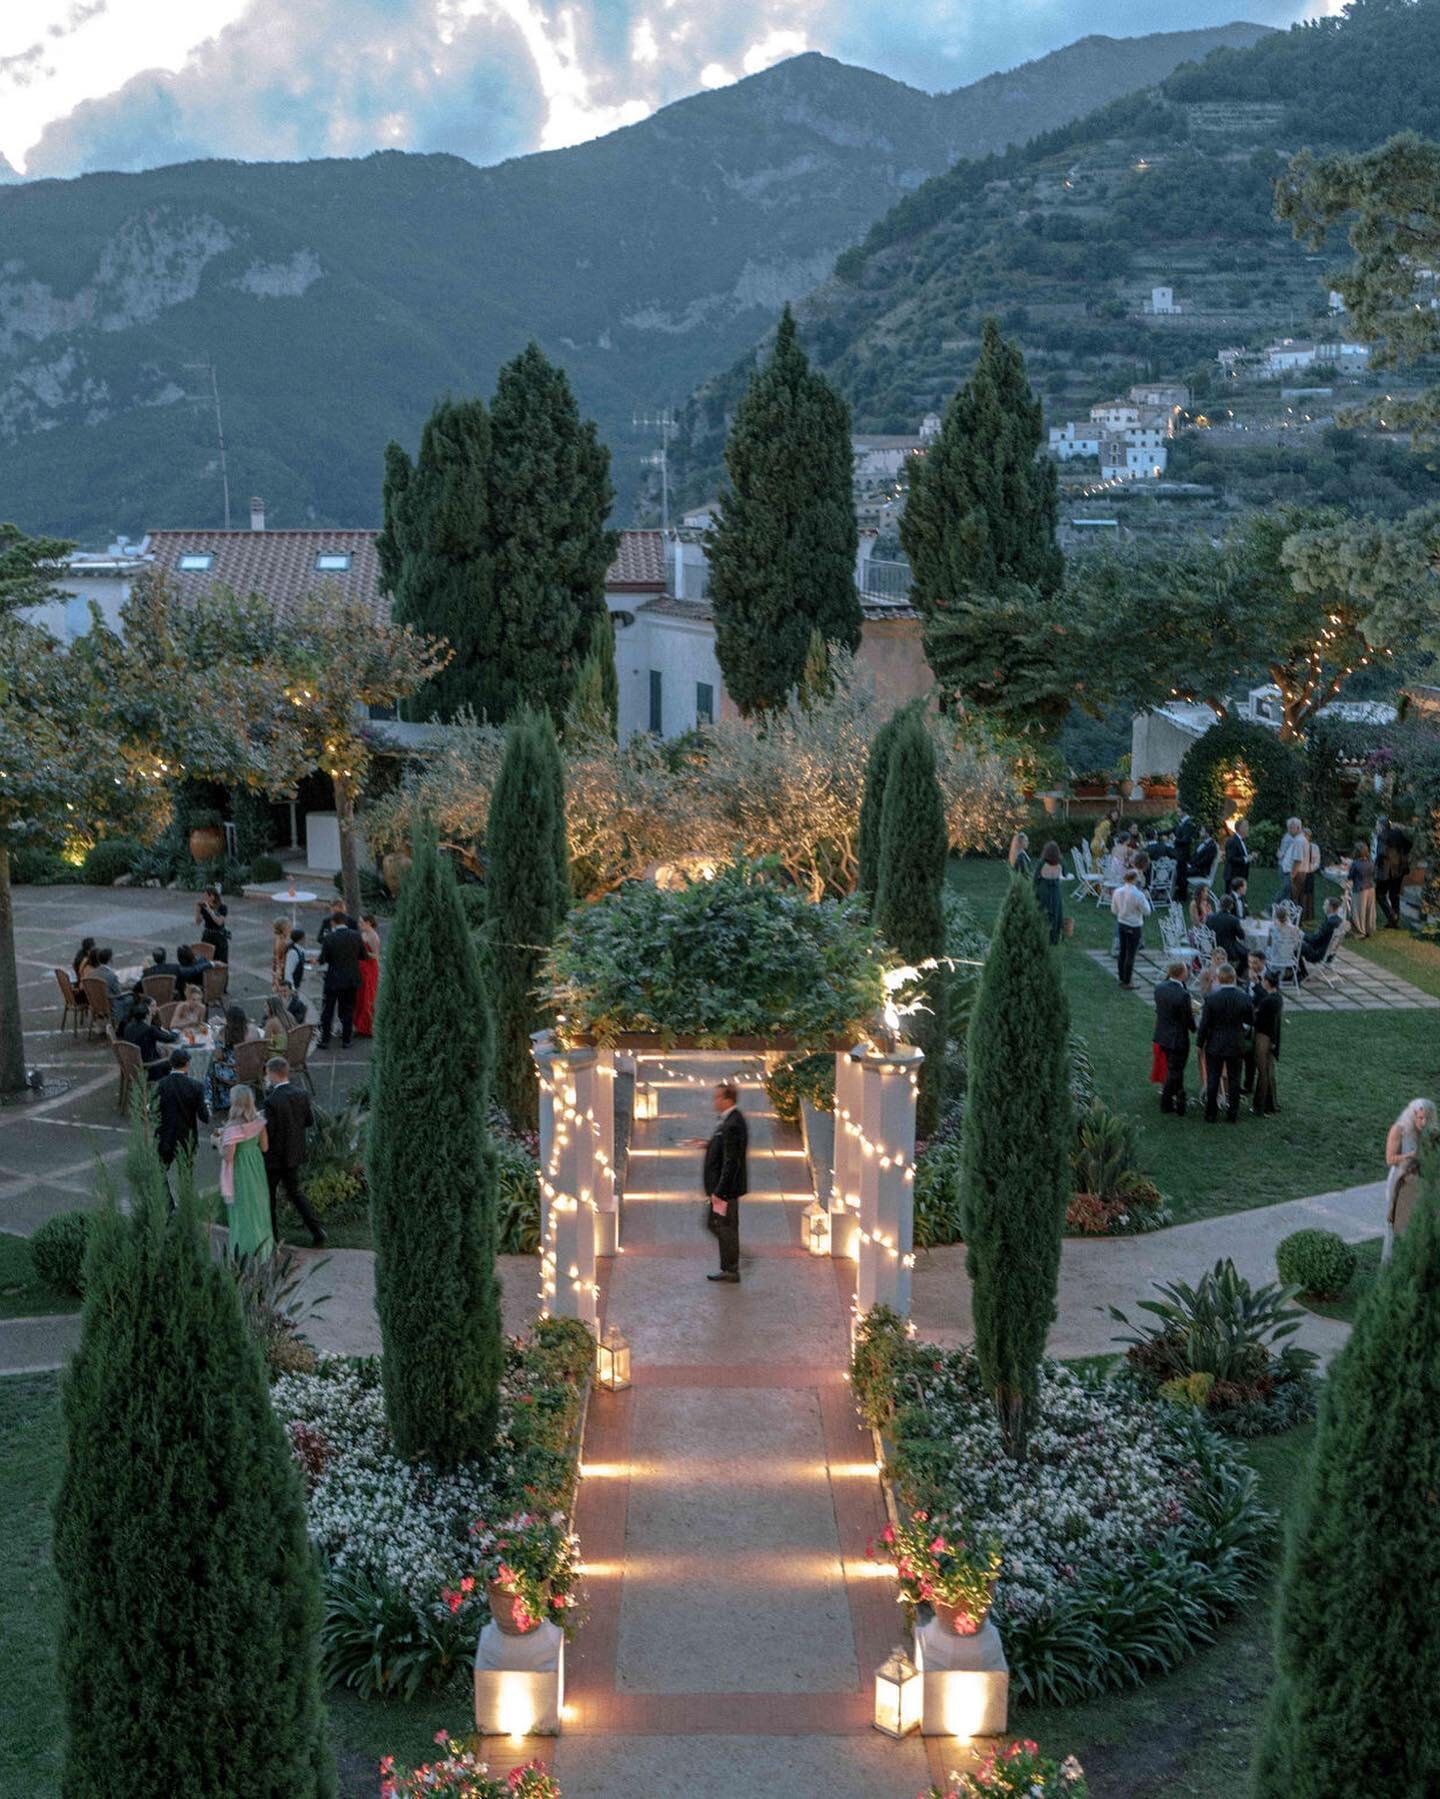 An unforgettable evening in Italy... when the sun set over the Amalfi Coastline, the wine flowed freely, the musicians didn&rsquo;t skip a beat, and the cocktails led to the most enchanting dinner party that transitioned to an epic dance party under 